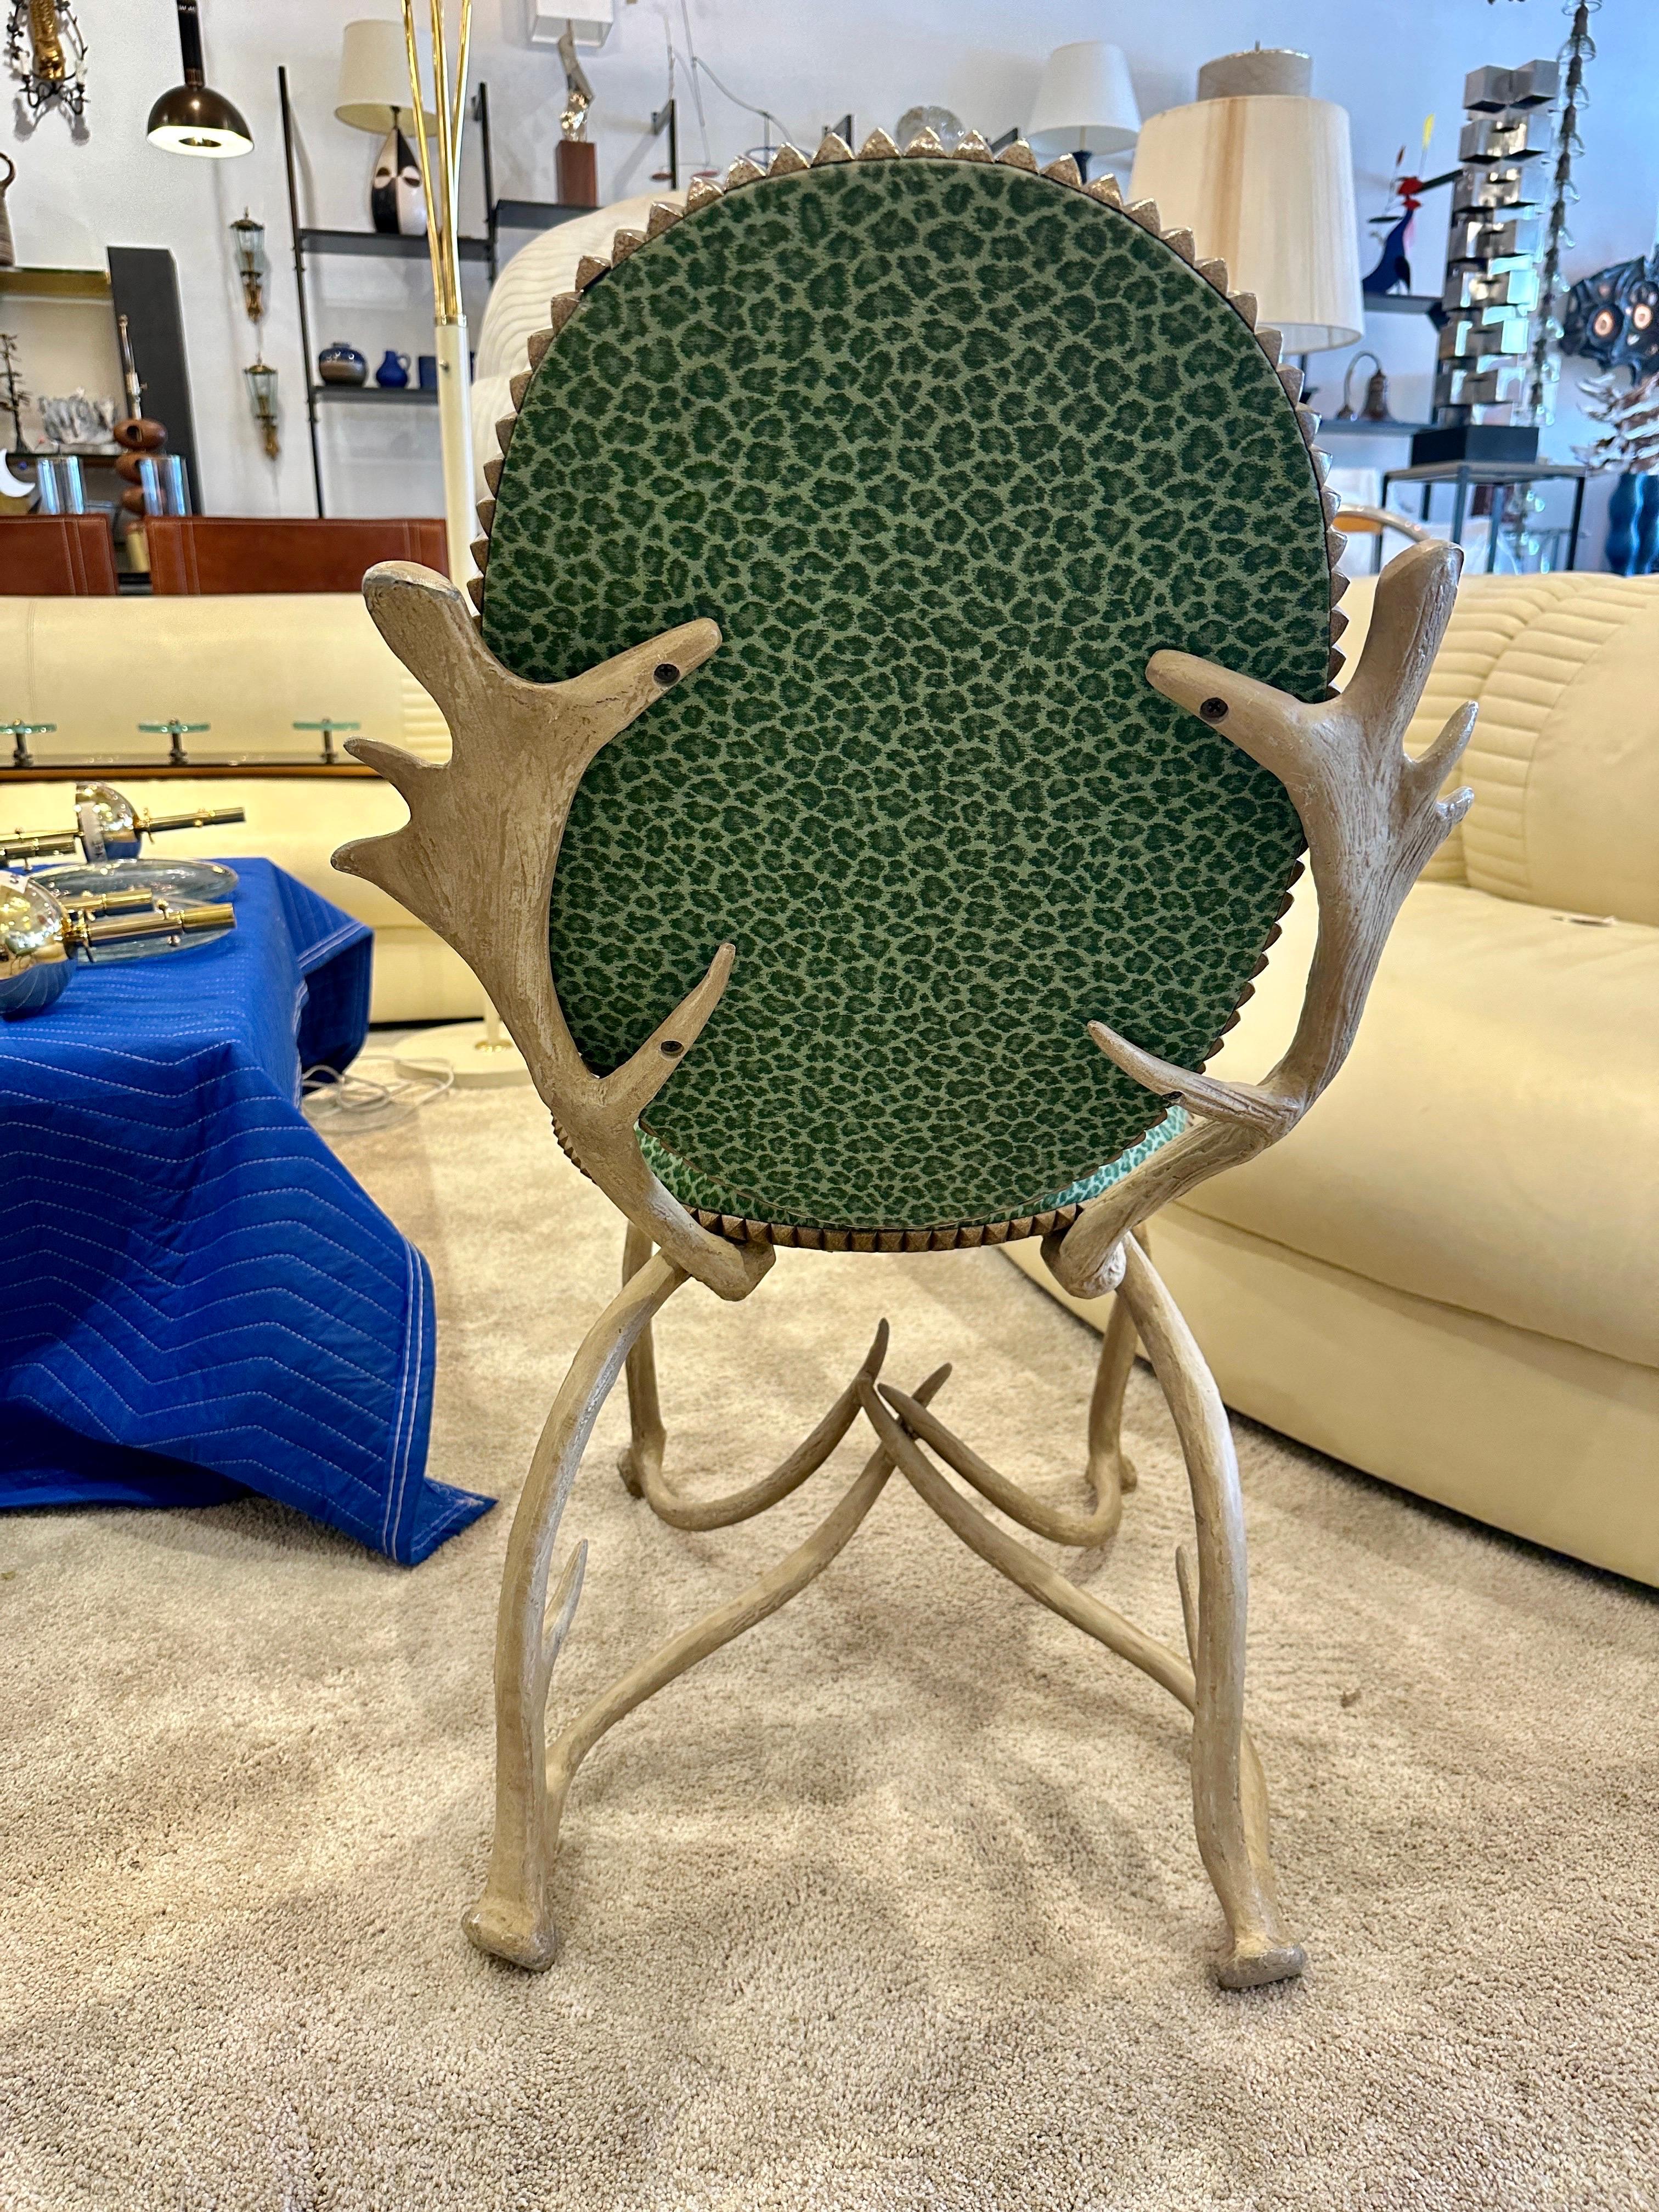 A fanciful American 1970s aluminum antler chair designed by Arthur Court, San Francisco (1928-2015); a new and innovating aluminum casting process led Arthur and Arthur Court Designs into a New Era; his unique aluminum furniture and accessories